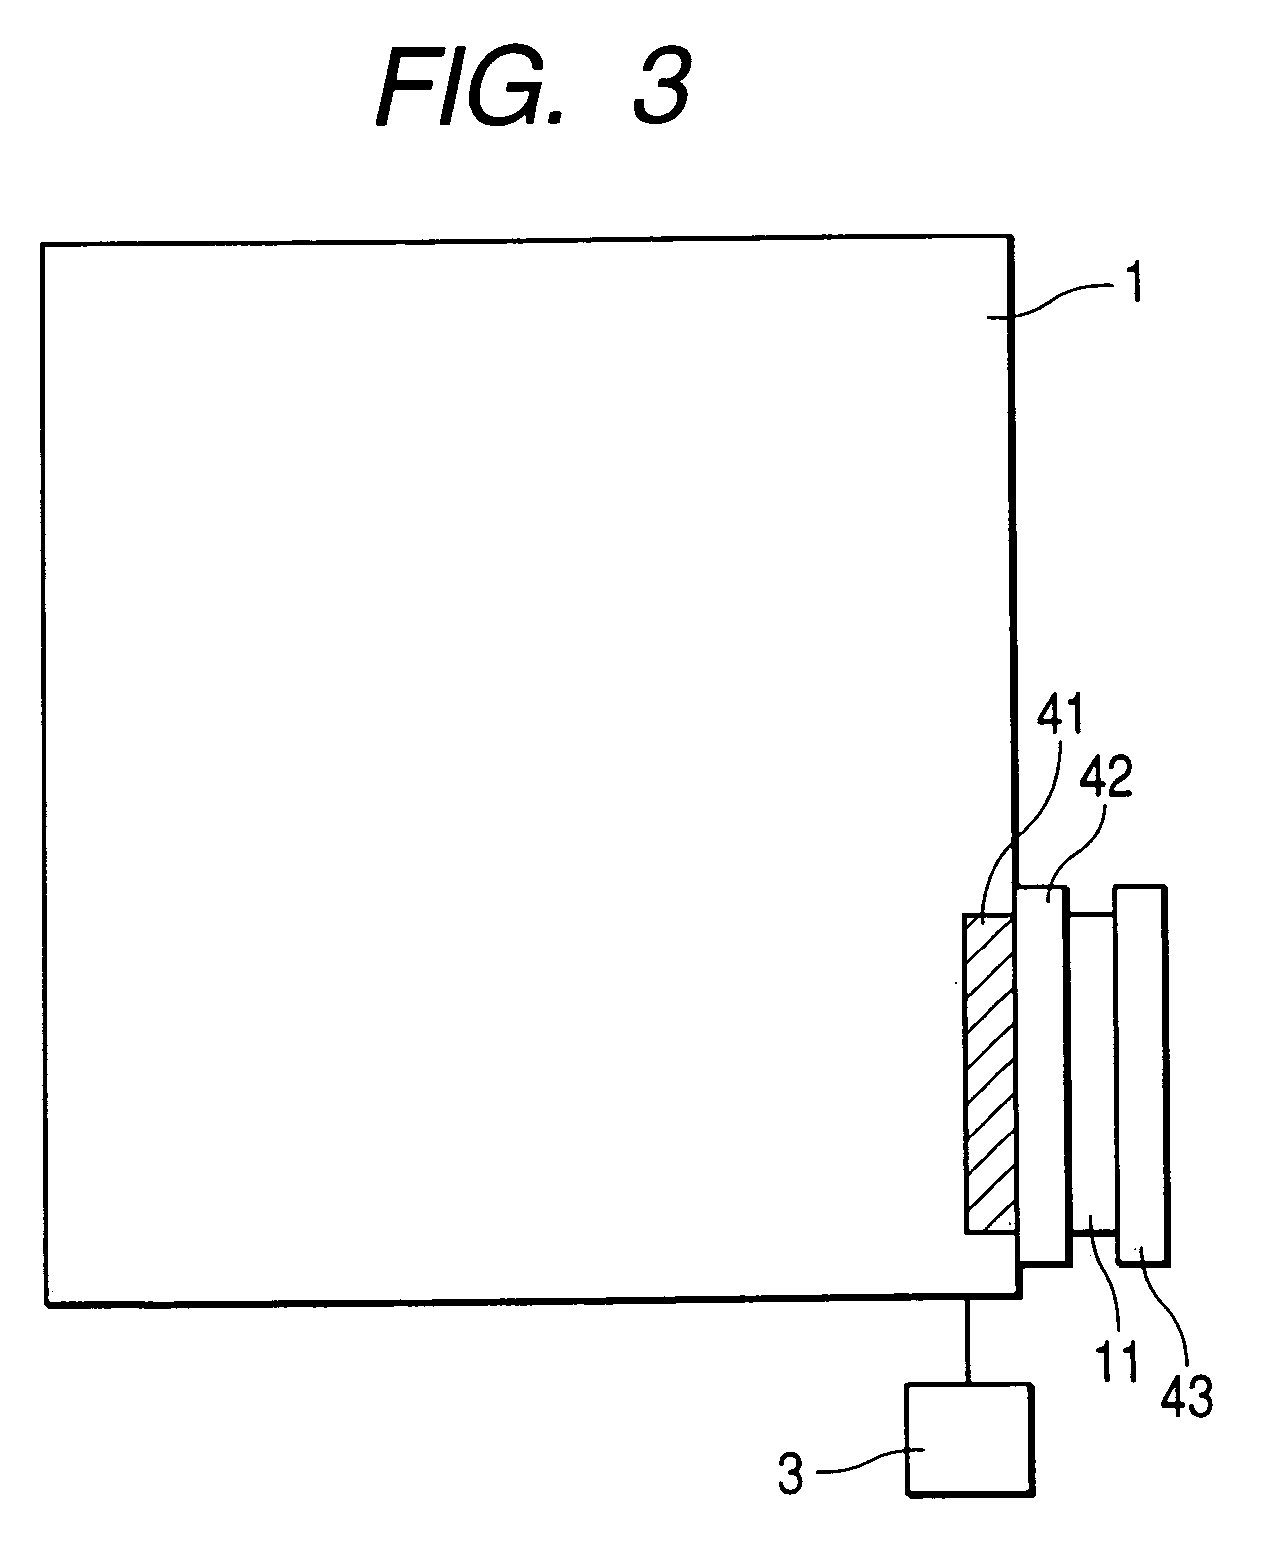 Fuel cell system for an automotive vehicle